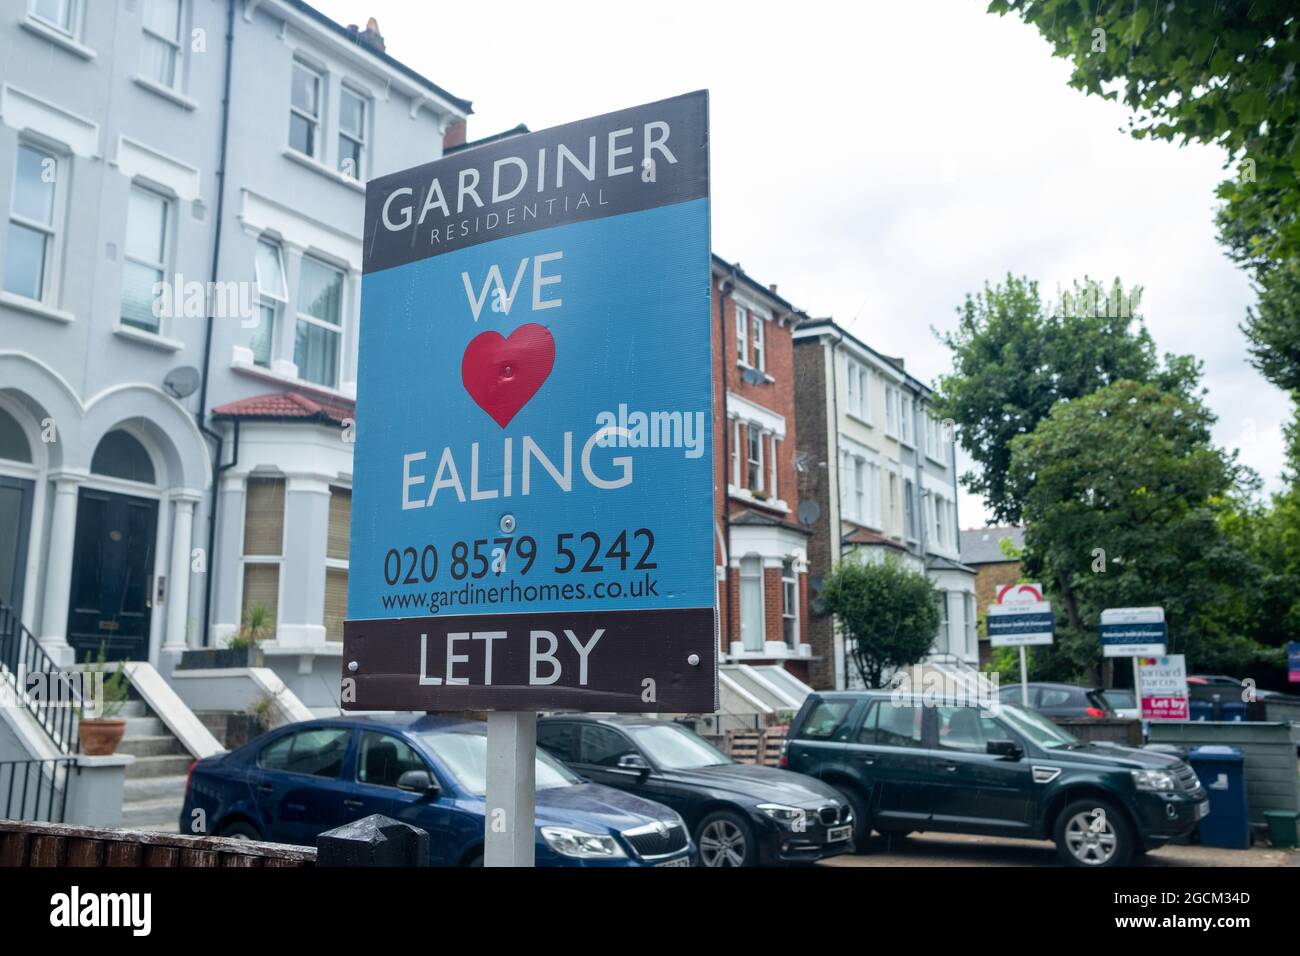 London, August 2021: Local Estate agent sign board advertising property in Ealing, West London Stock Photo